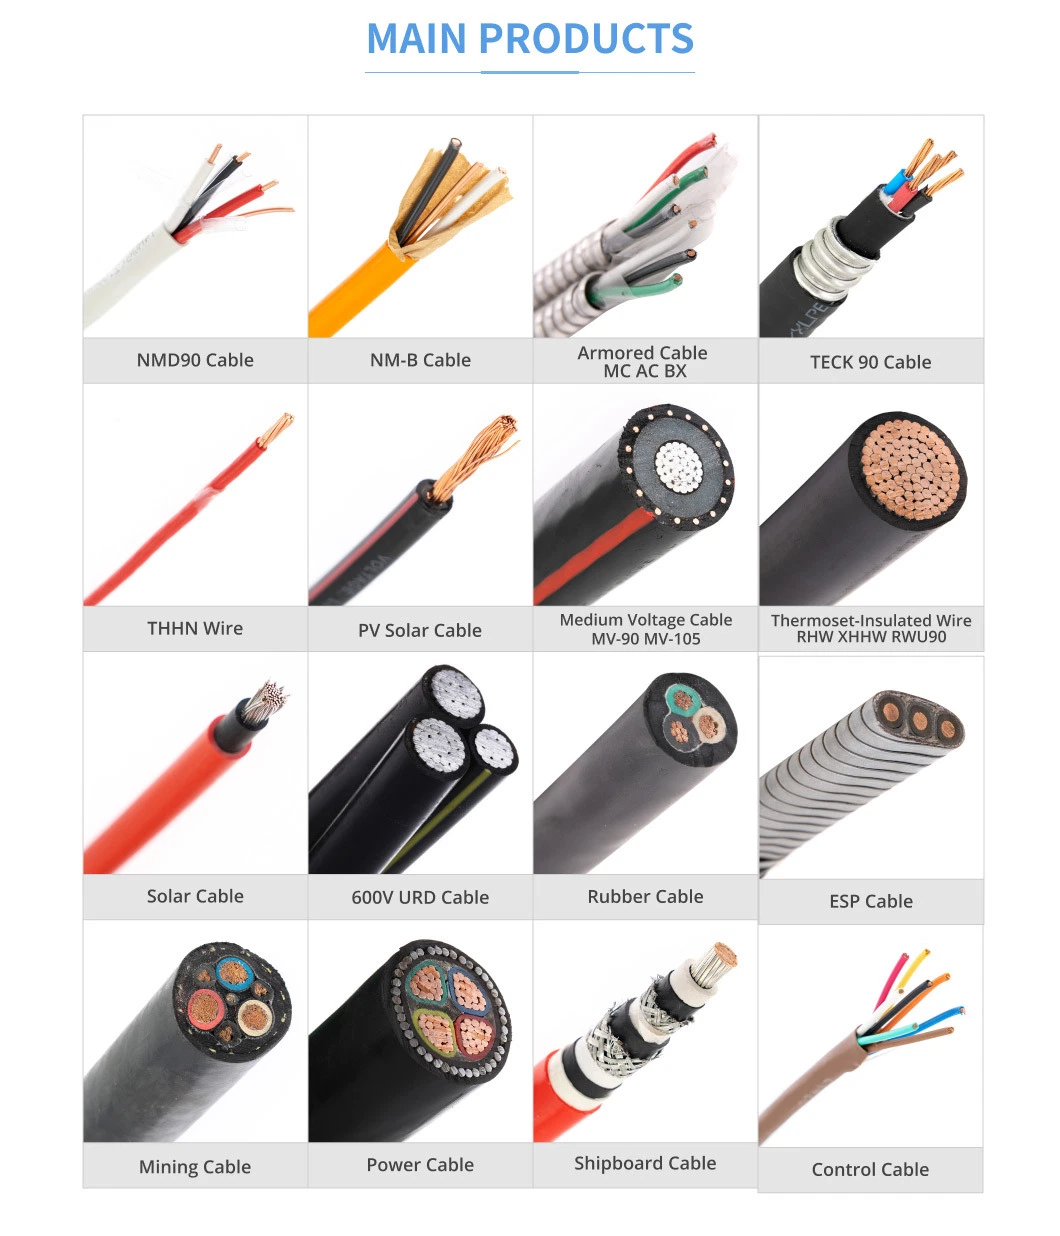 Dlo Diesel Locomotive Cable 4 AWG, 6AWG 2000V Flexible Tinned Copper Conductor 373 Electric Wire 777